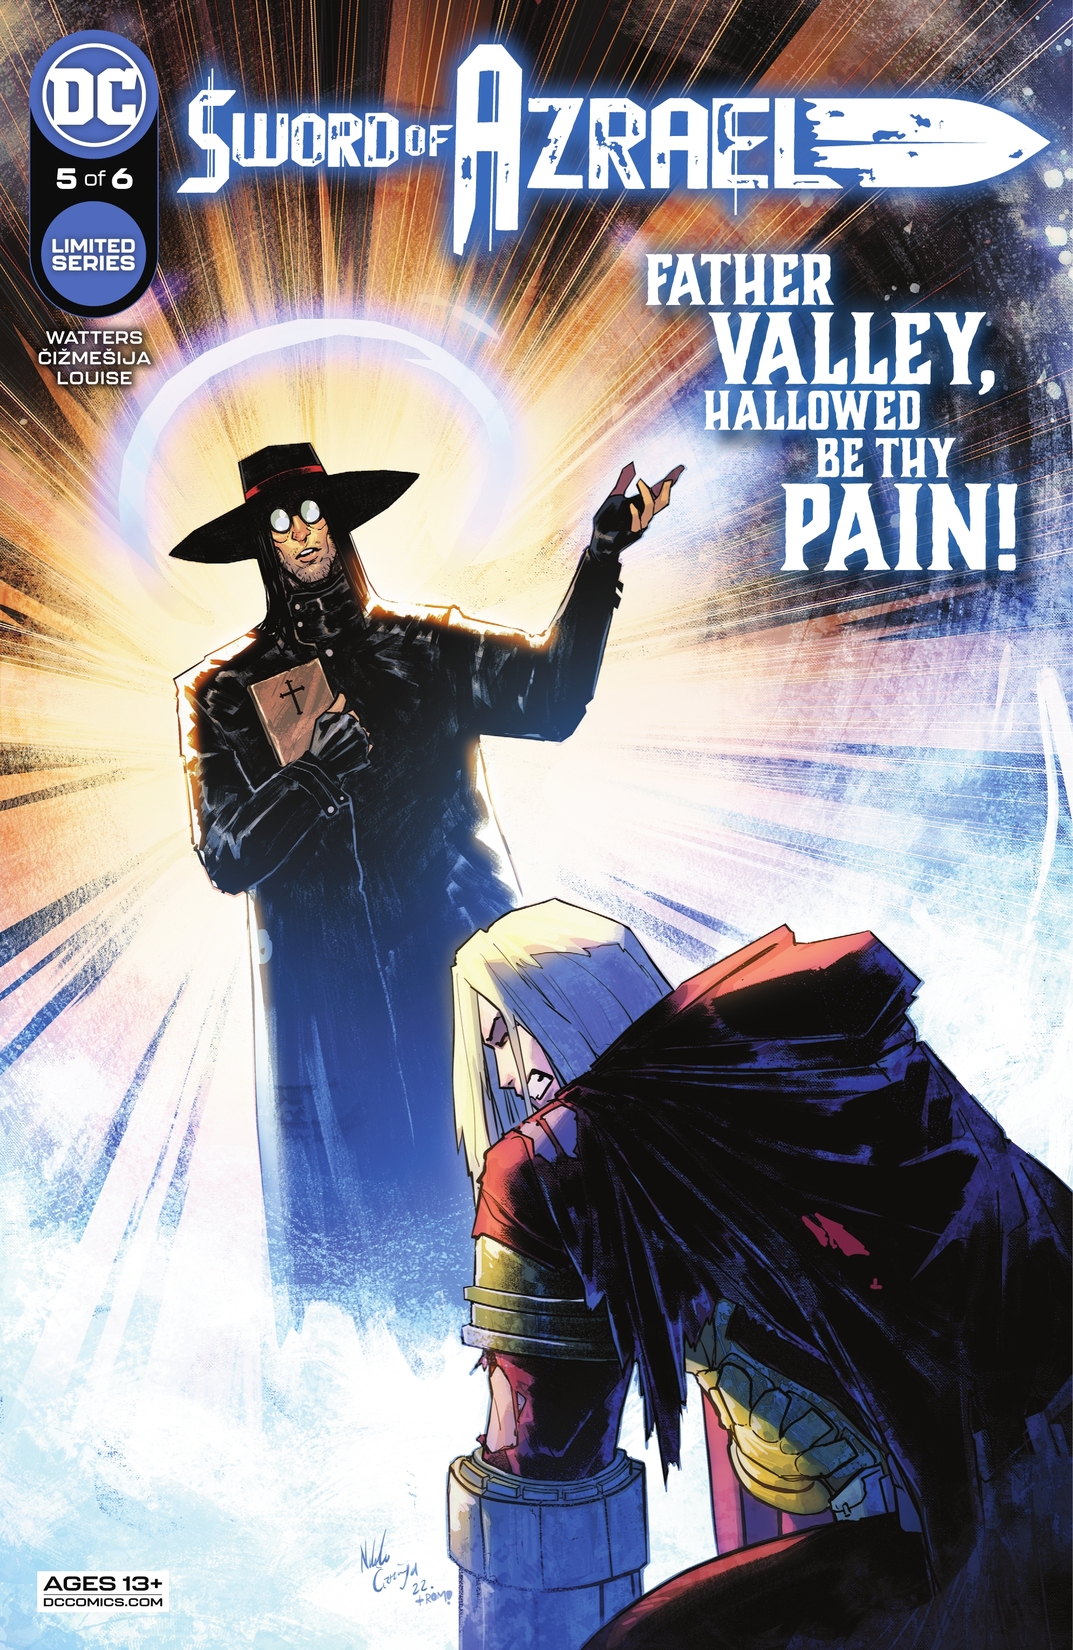 Sword of Azrael #5 preview images